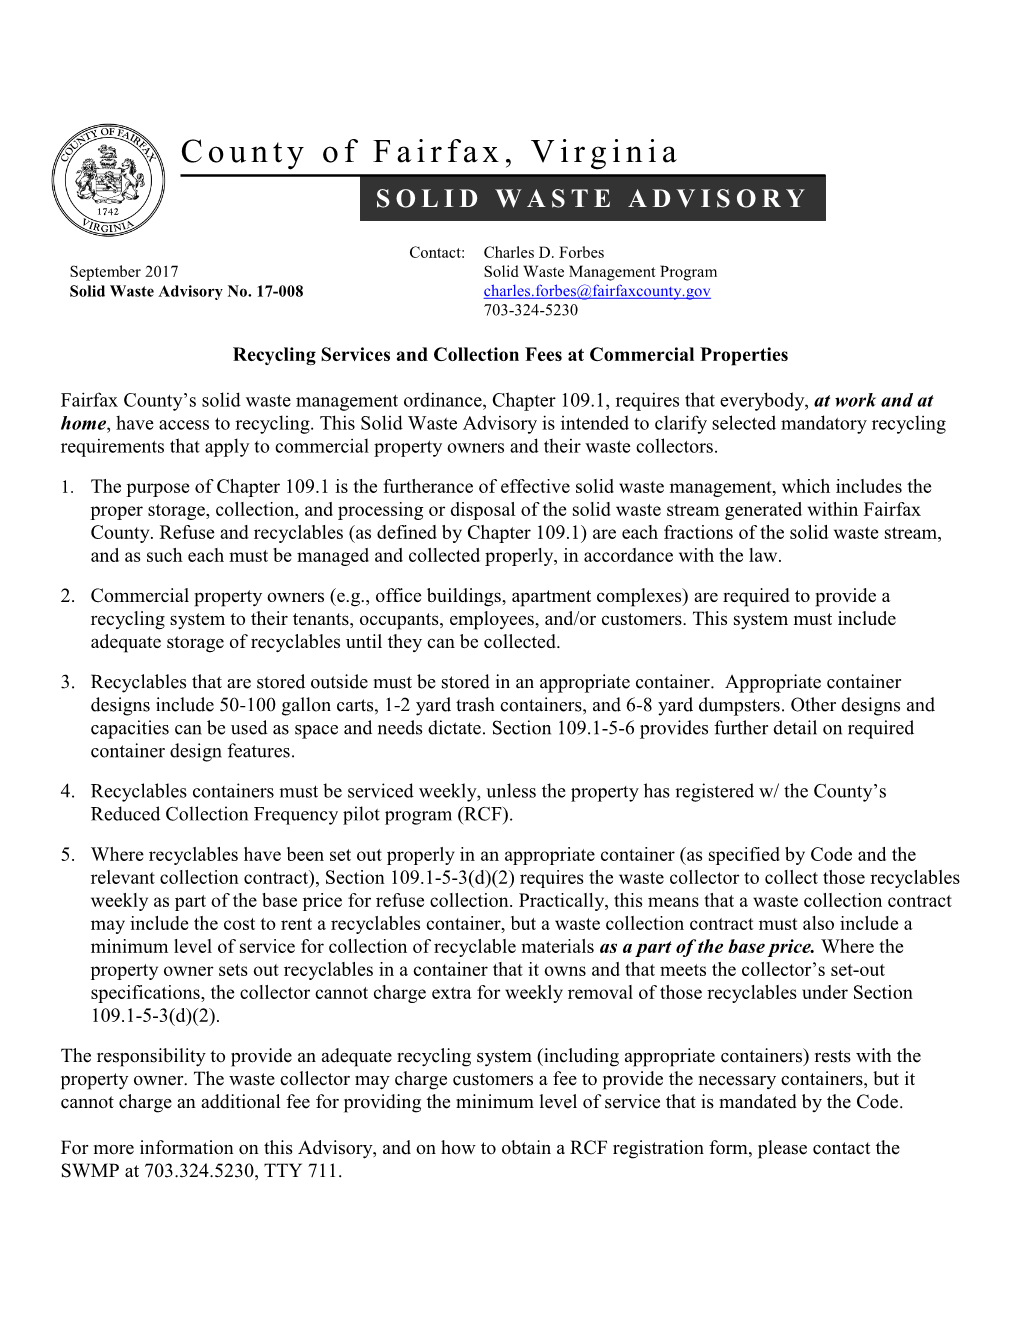 Solid Waste Advisory No. 17-008 Recycling Services and Collection